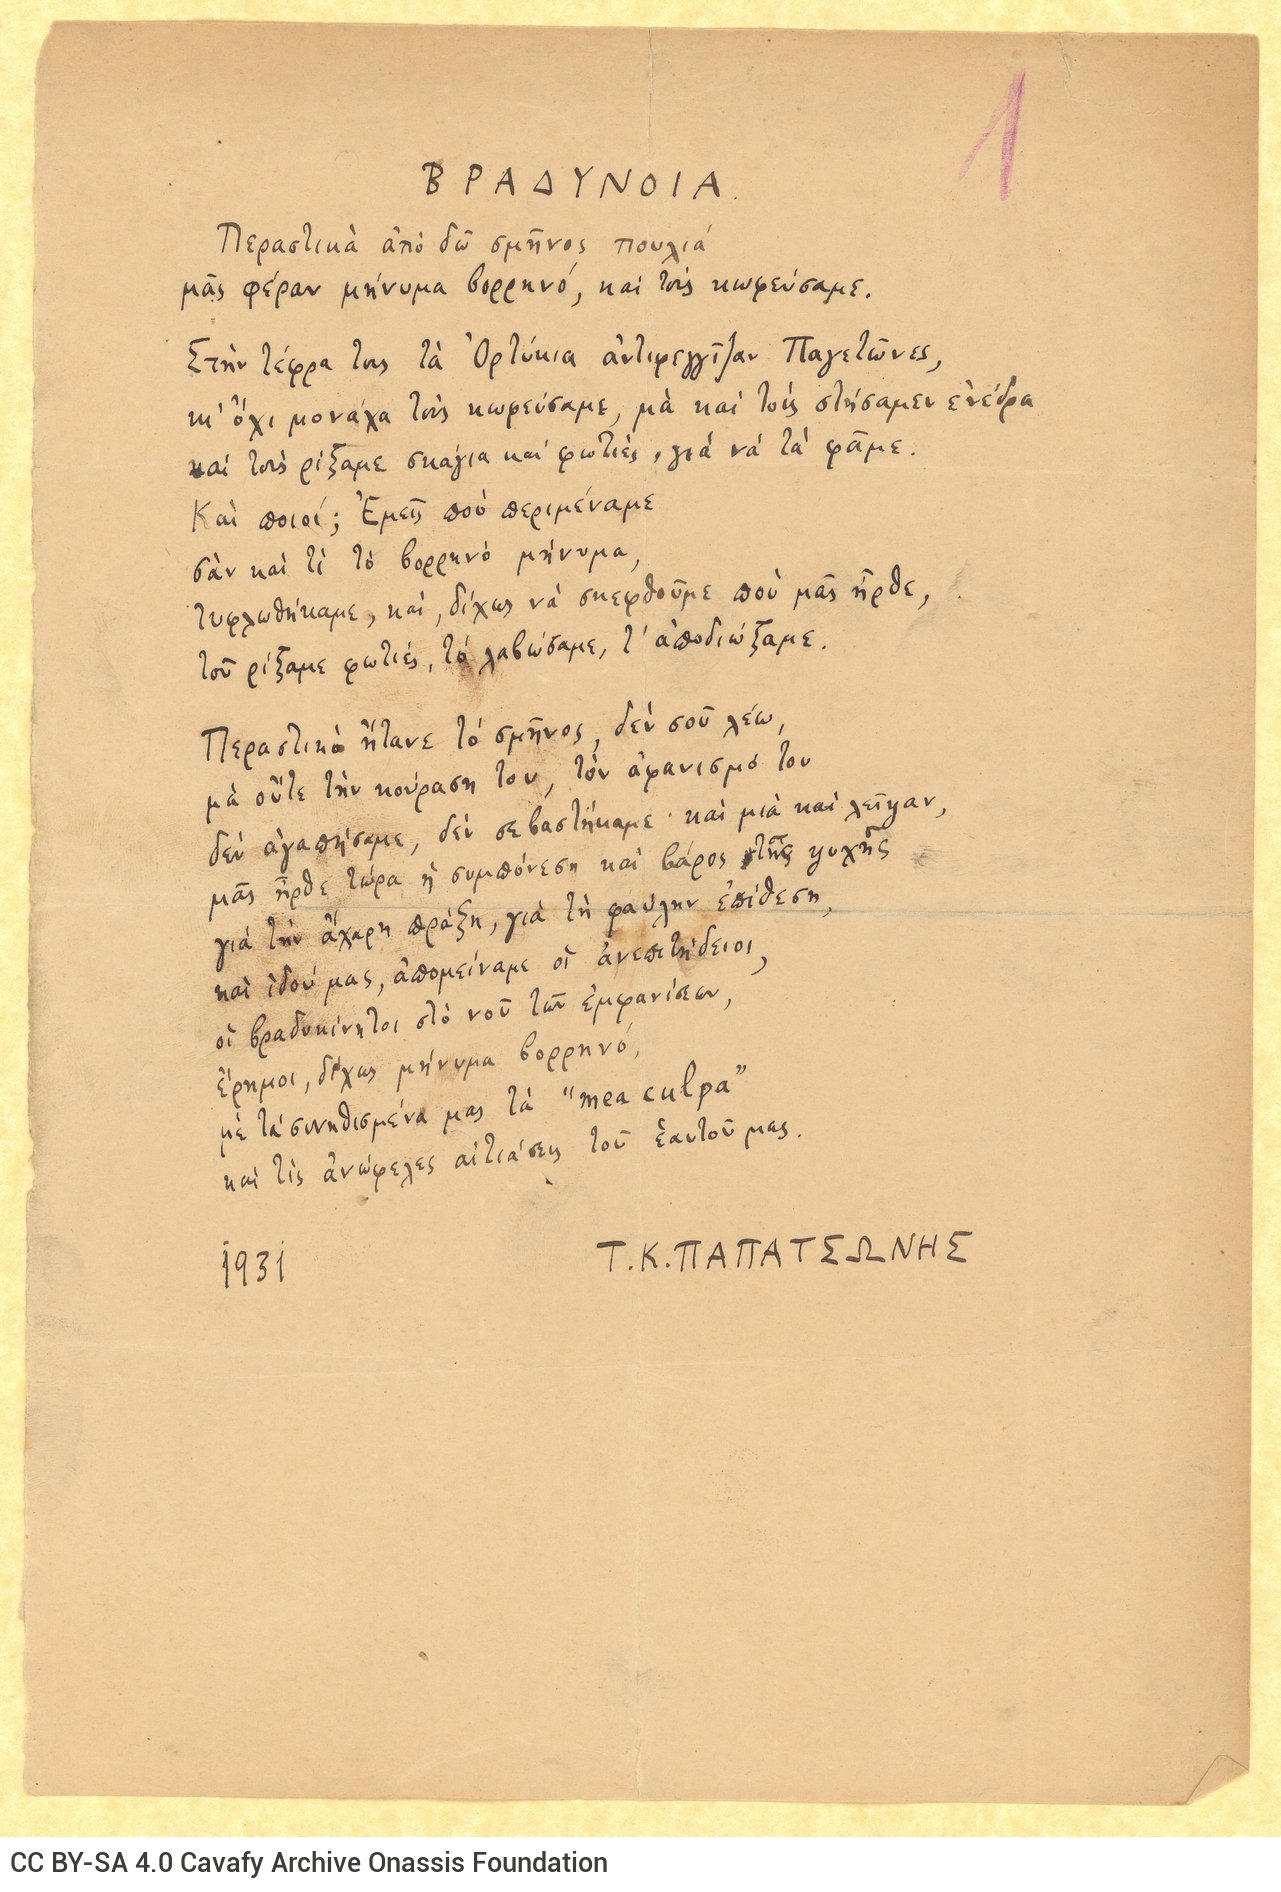 Manuscript of the poem "Vradynoia". The name "T. C. Papatzoni" as well as date indication ("1931") below the poem. Number "1"